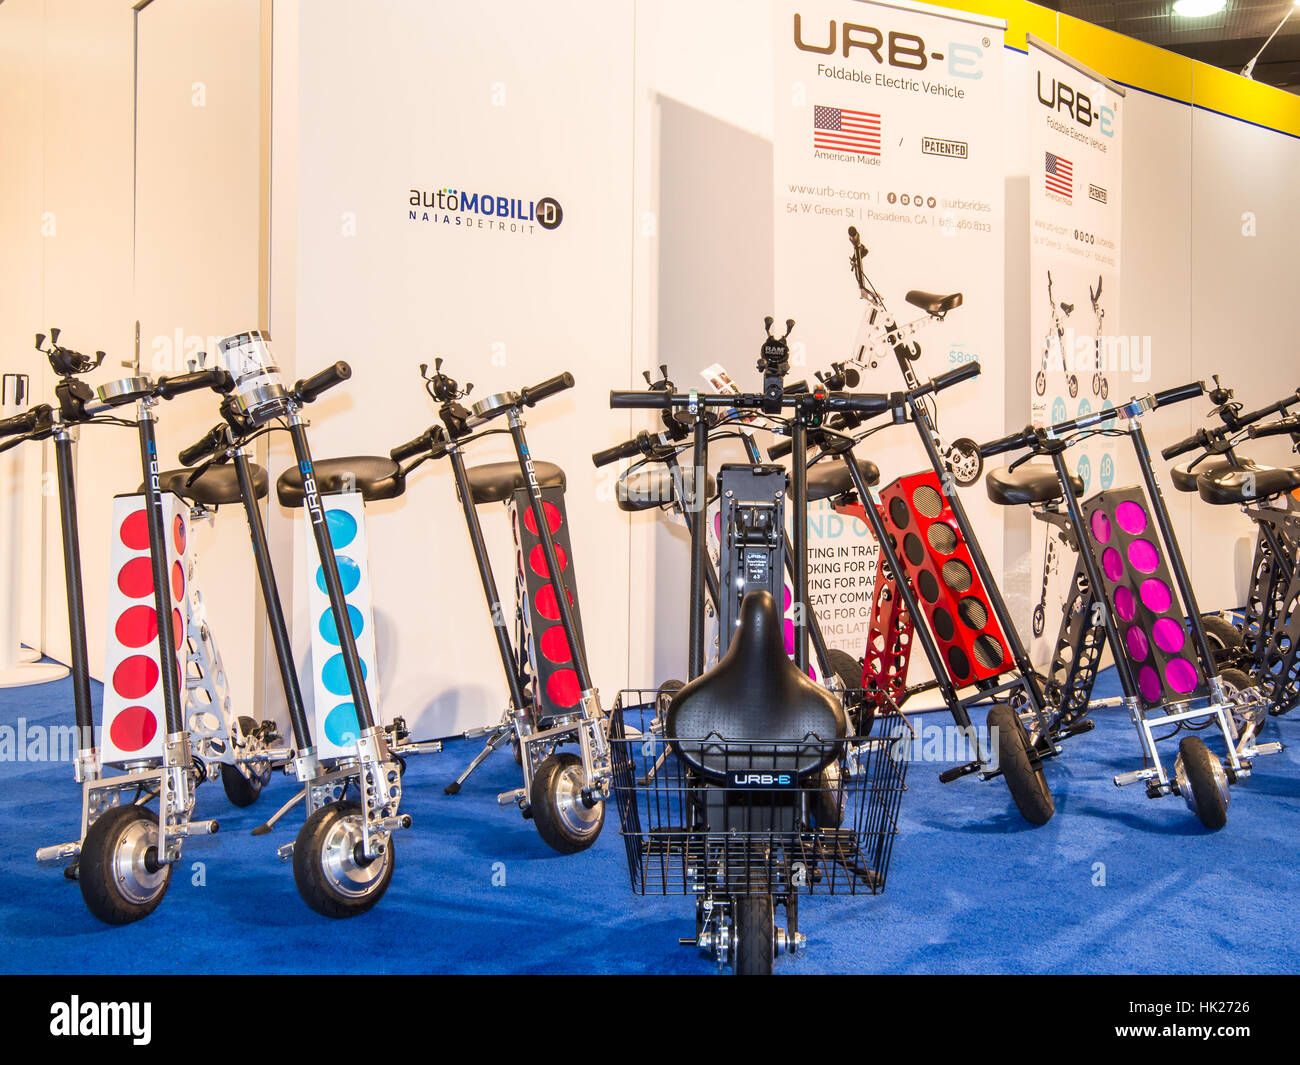 Several URB-E Sport foldable, electric scooters at the North American International Auto Show (NAIAS). Stock Photo